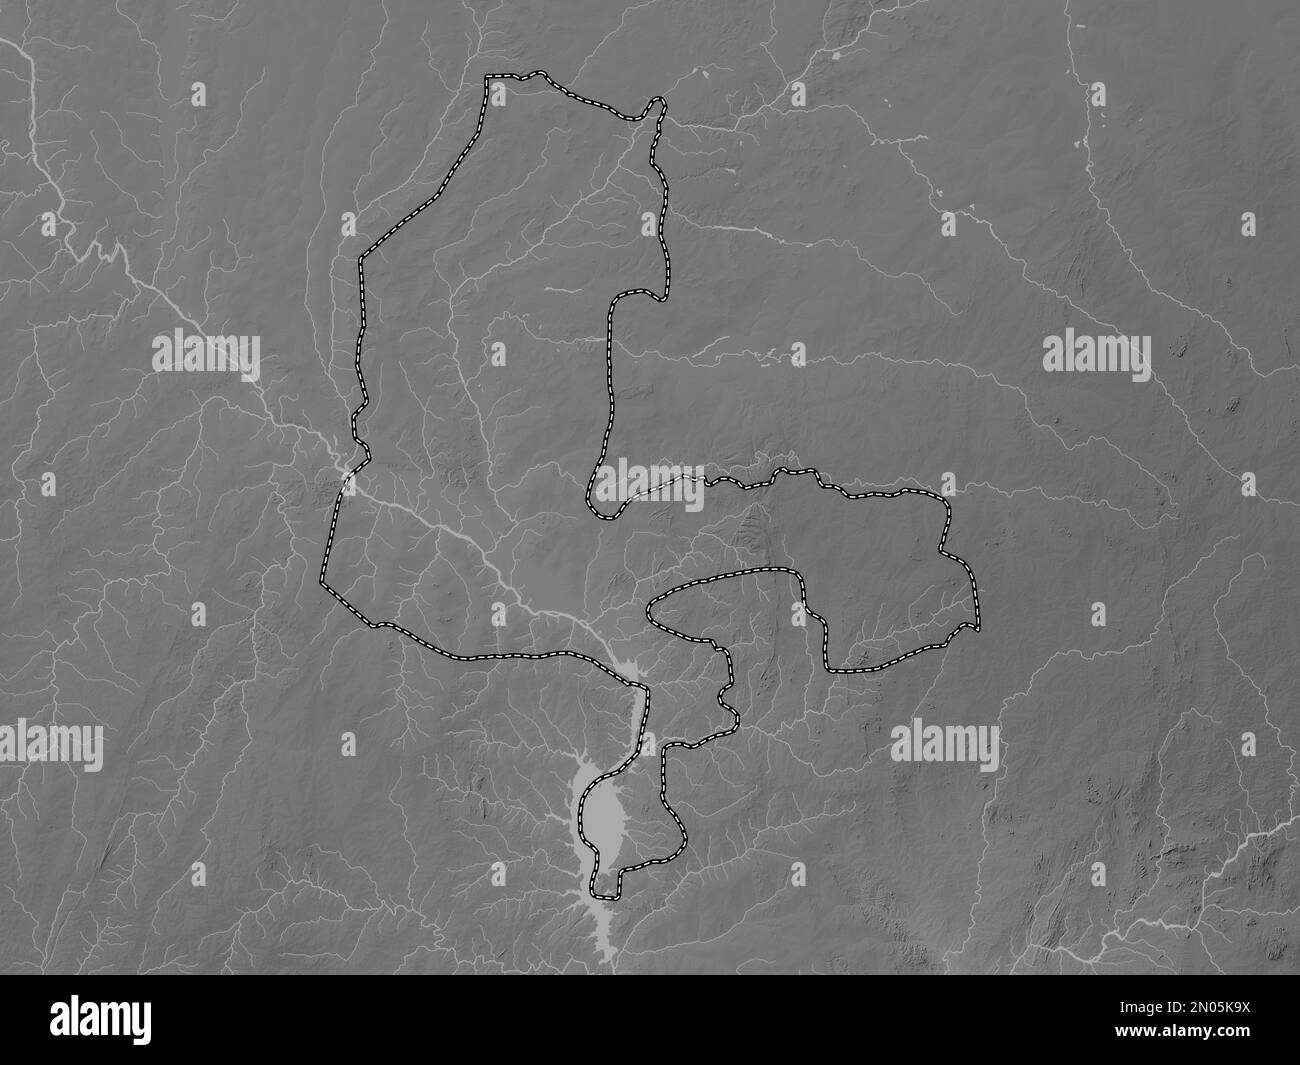 Kebbi, state of Nigeria. Grayscale elevation map with lakes and rivers Stock Photo